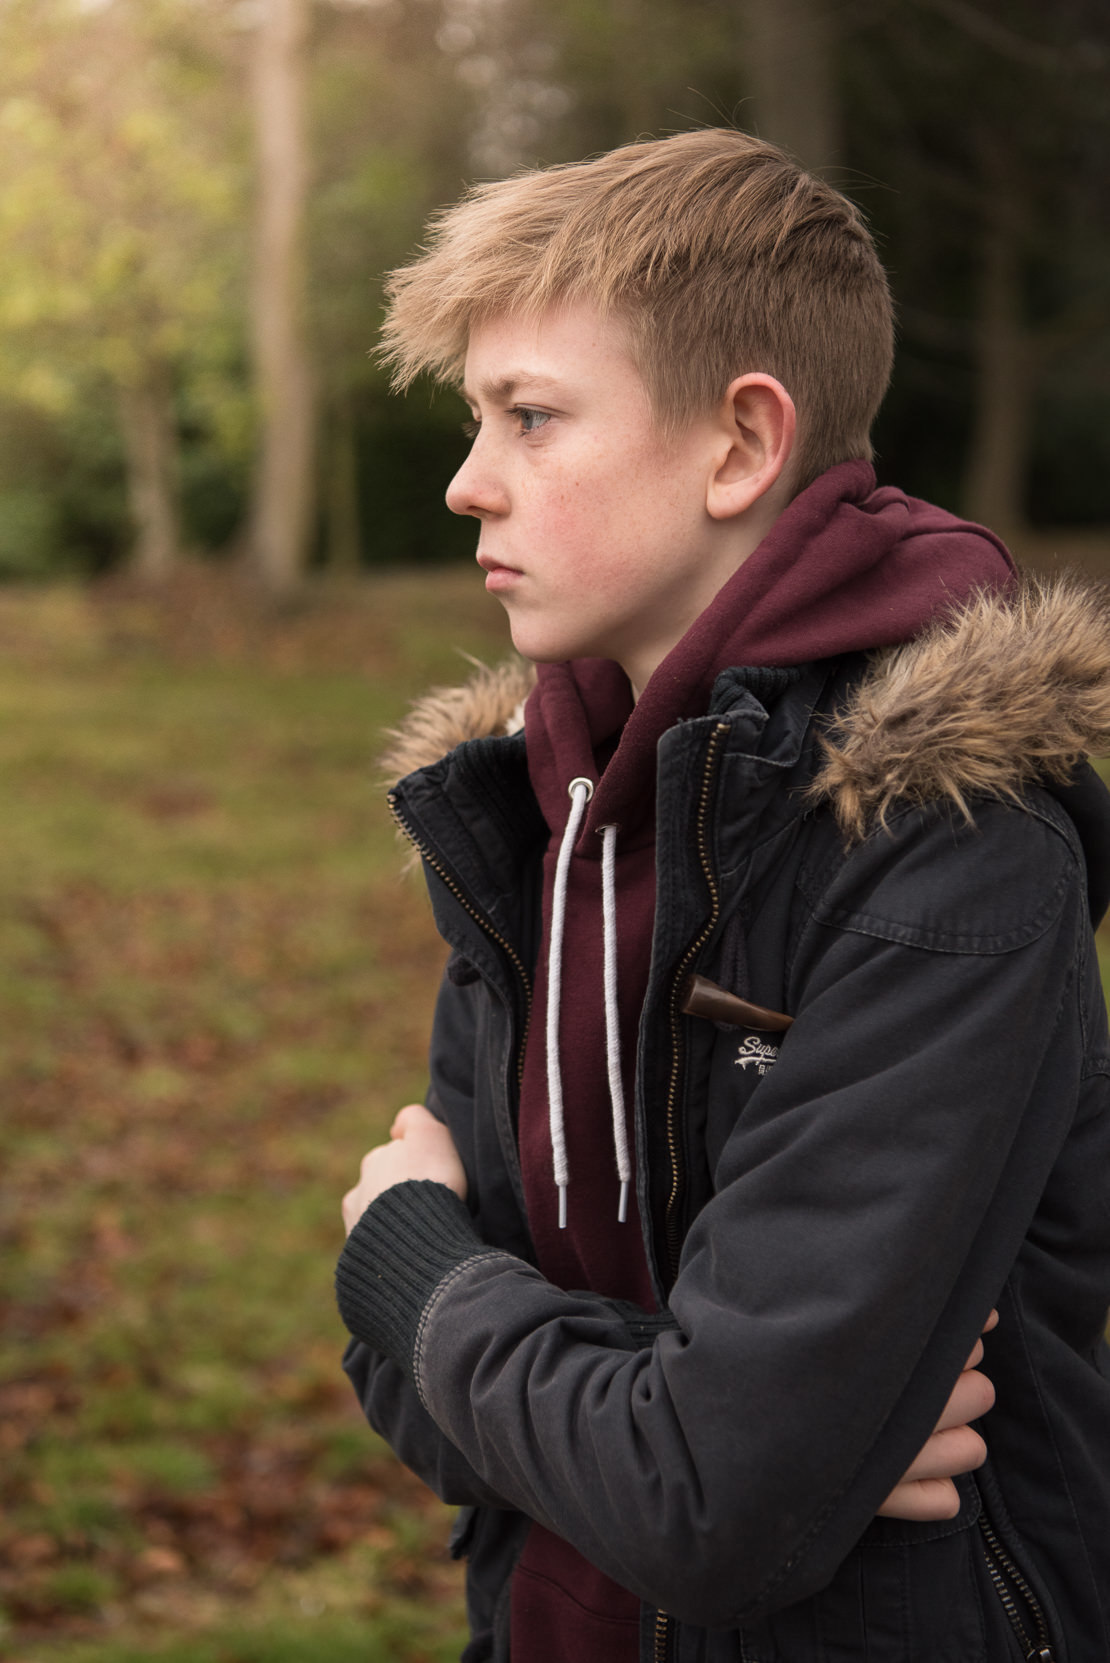 When to stop photographing a child - teenage boy in the woods facing looking into distance